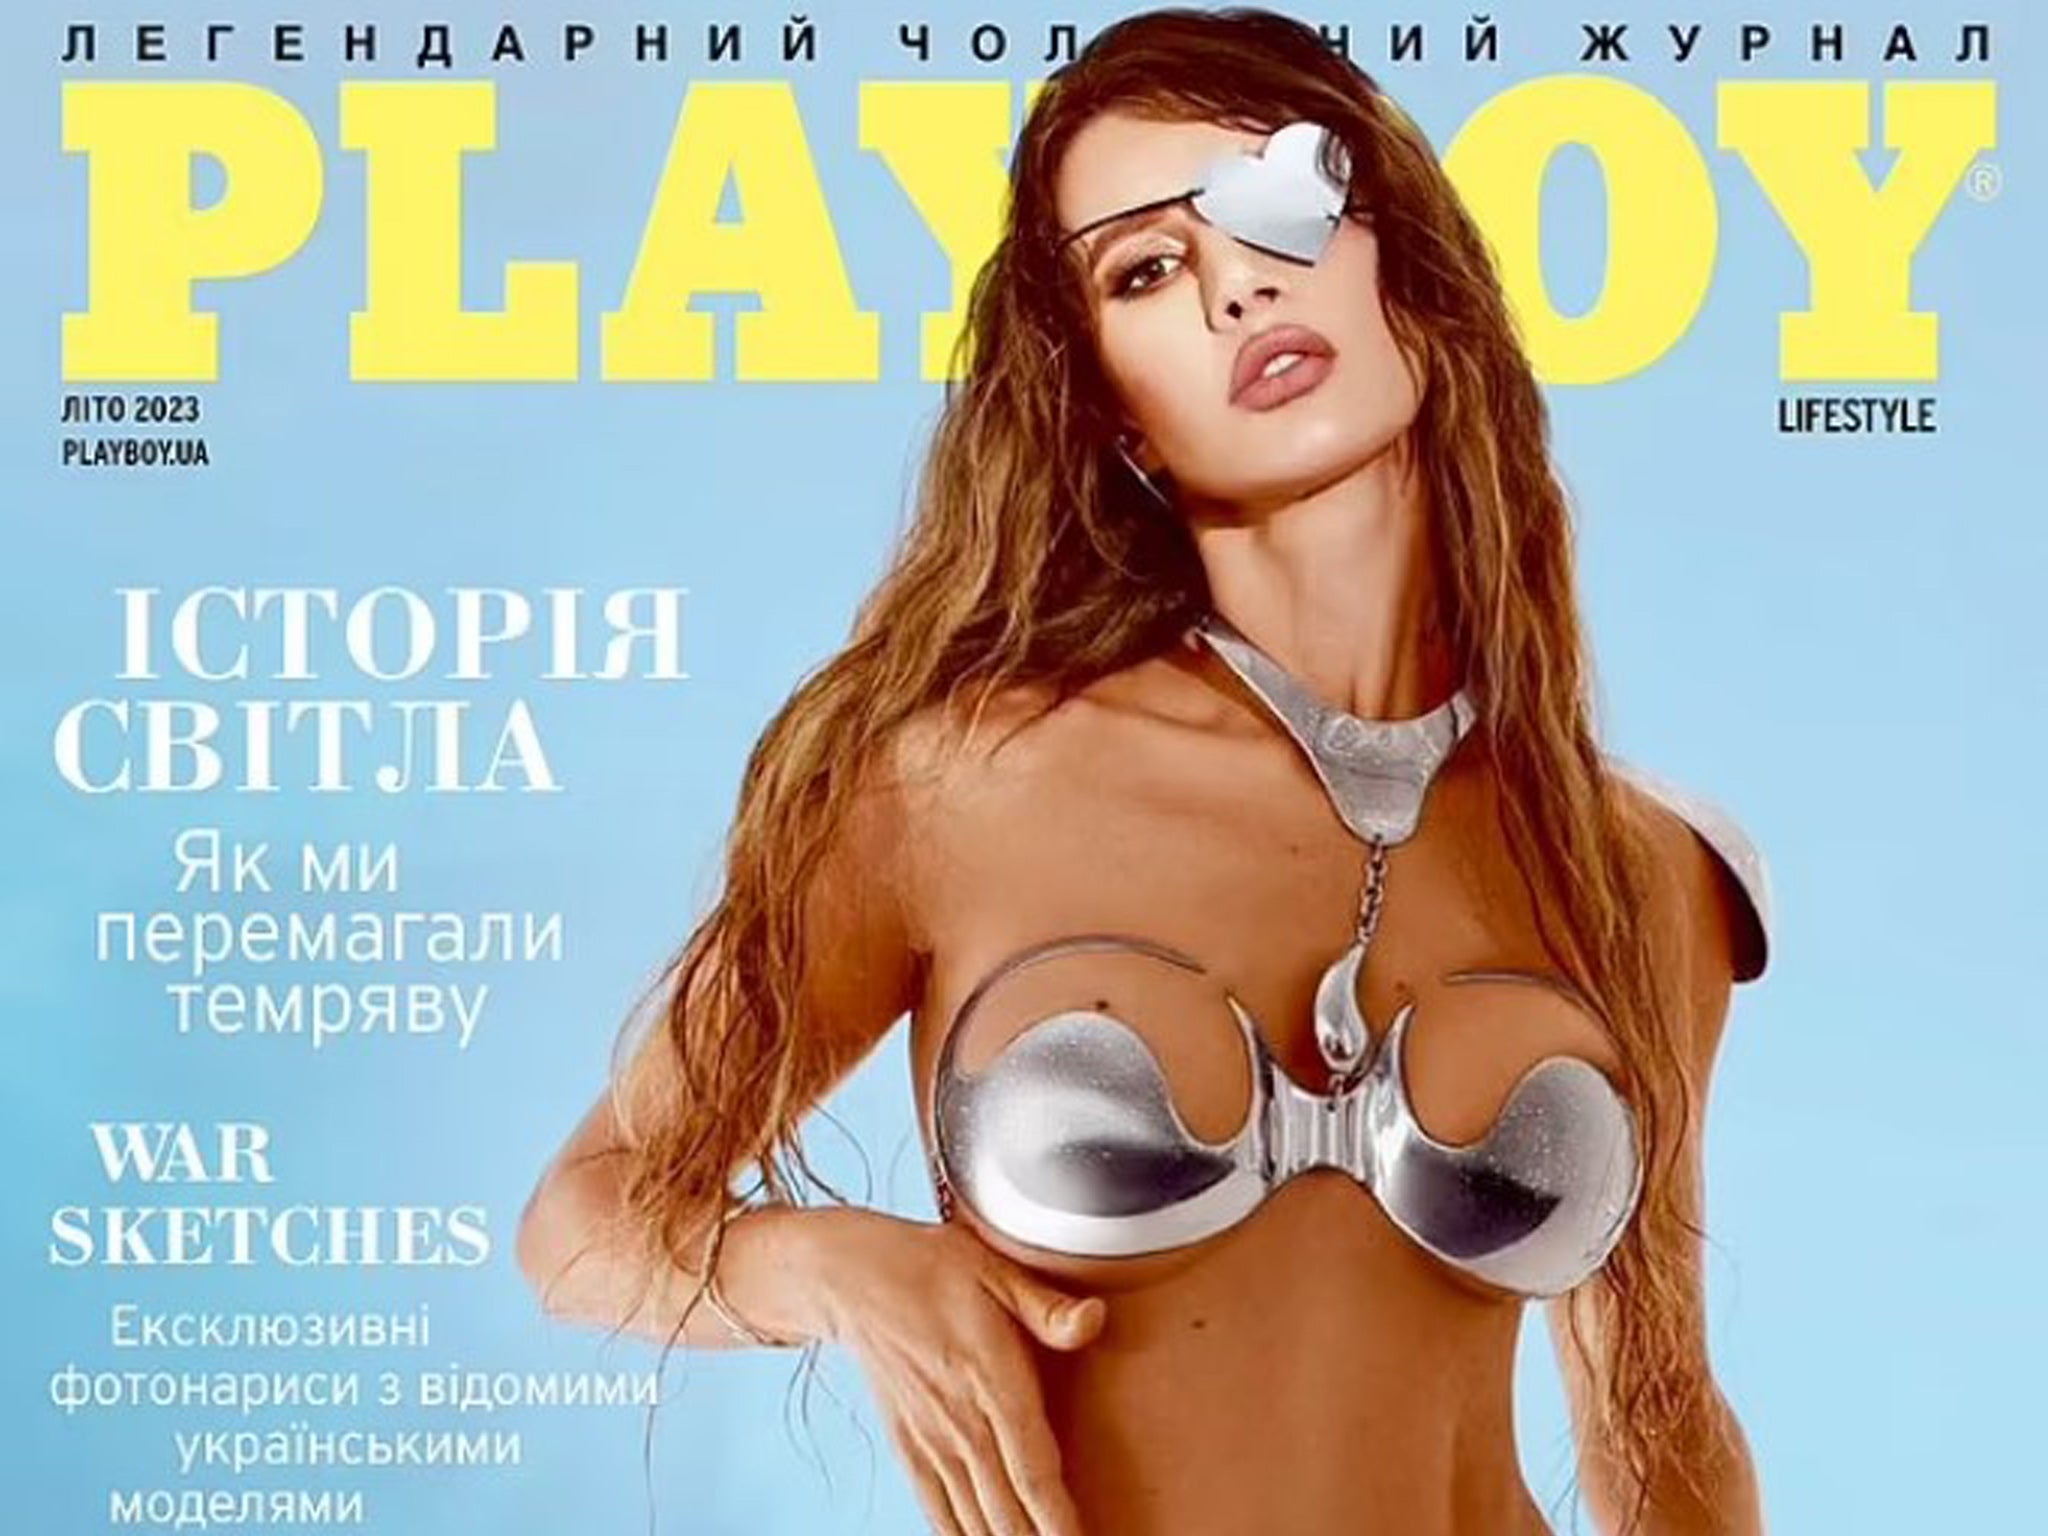 Iryna Bilotserkovets Ukrainian mother who lost an eye in attempted assassination is Playboy cover star The Independent image